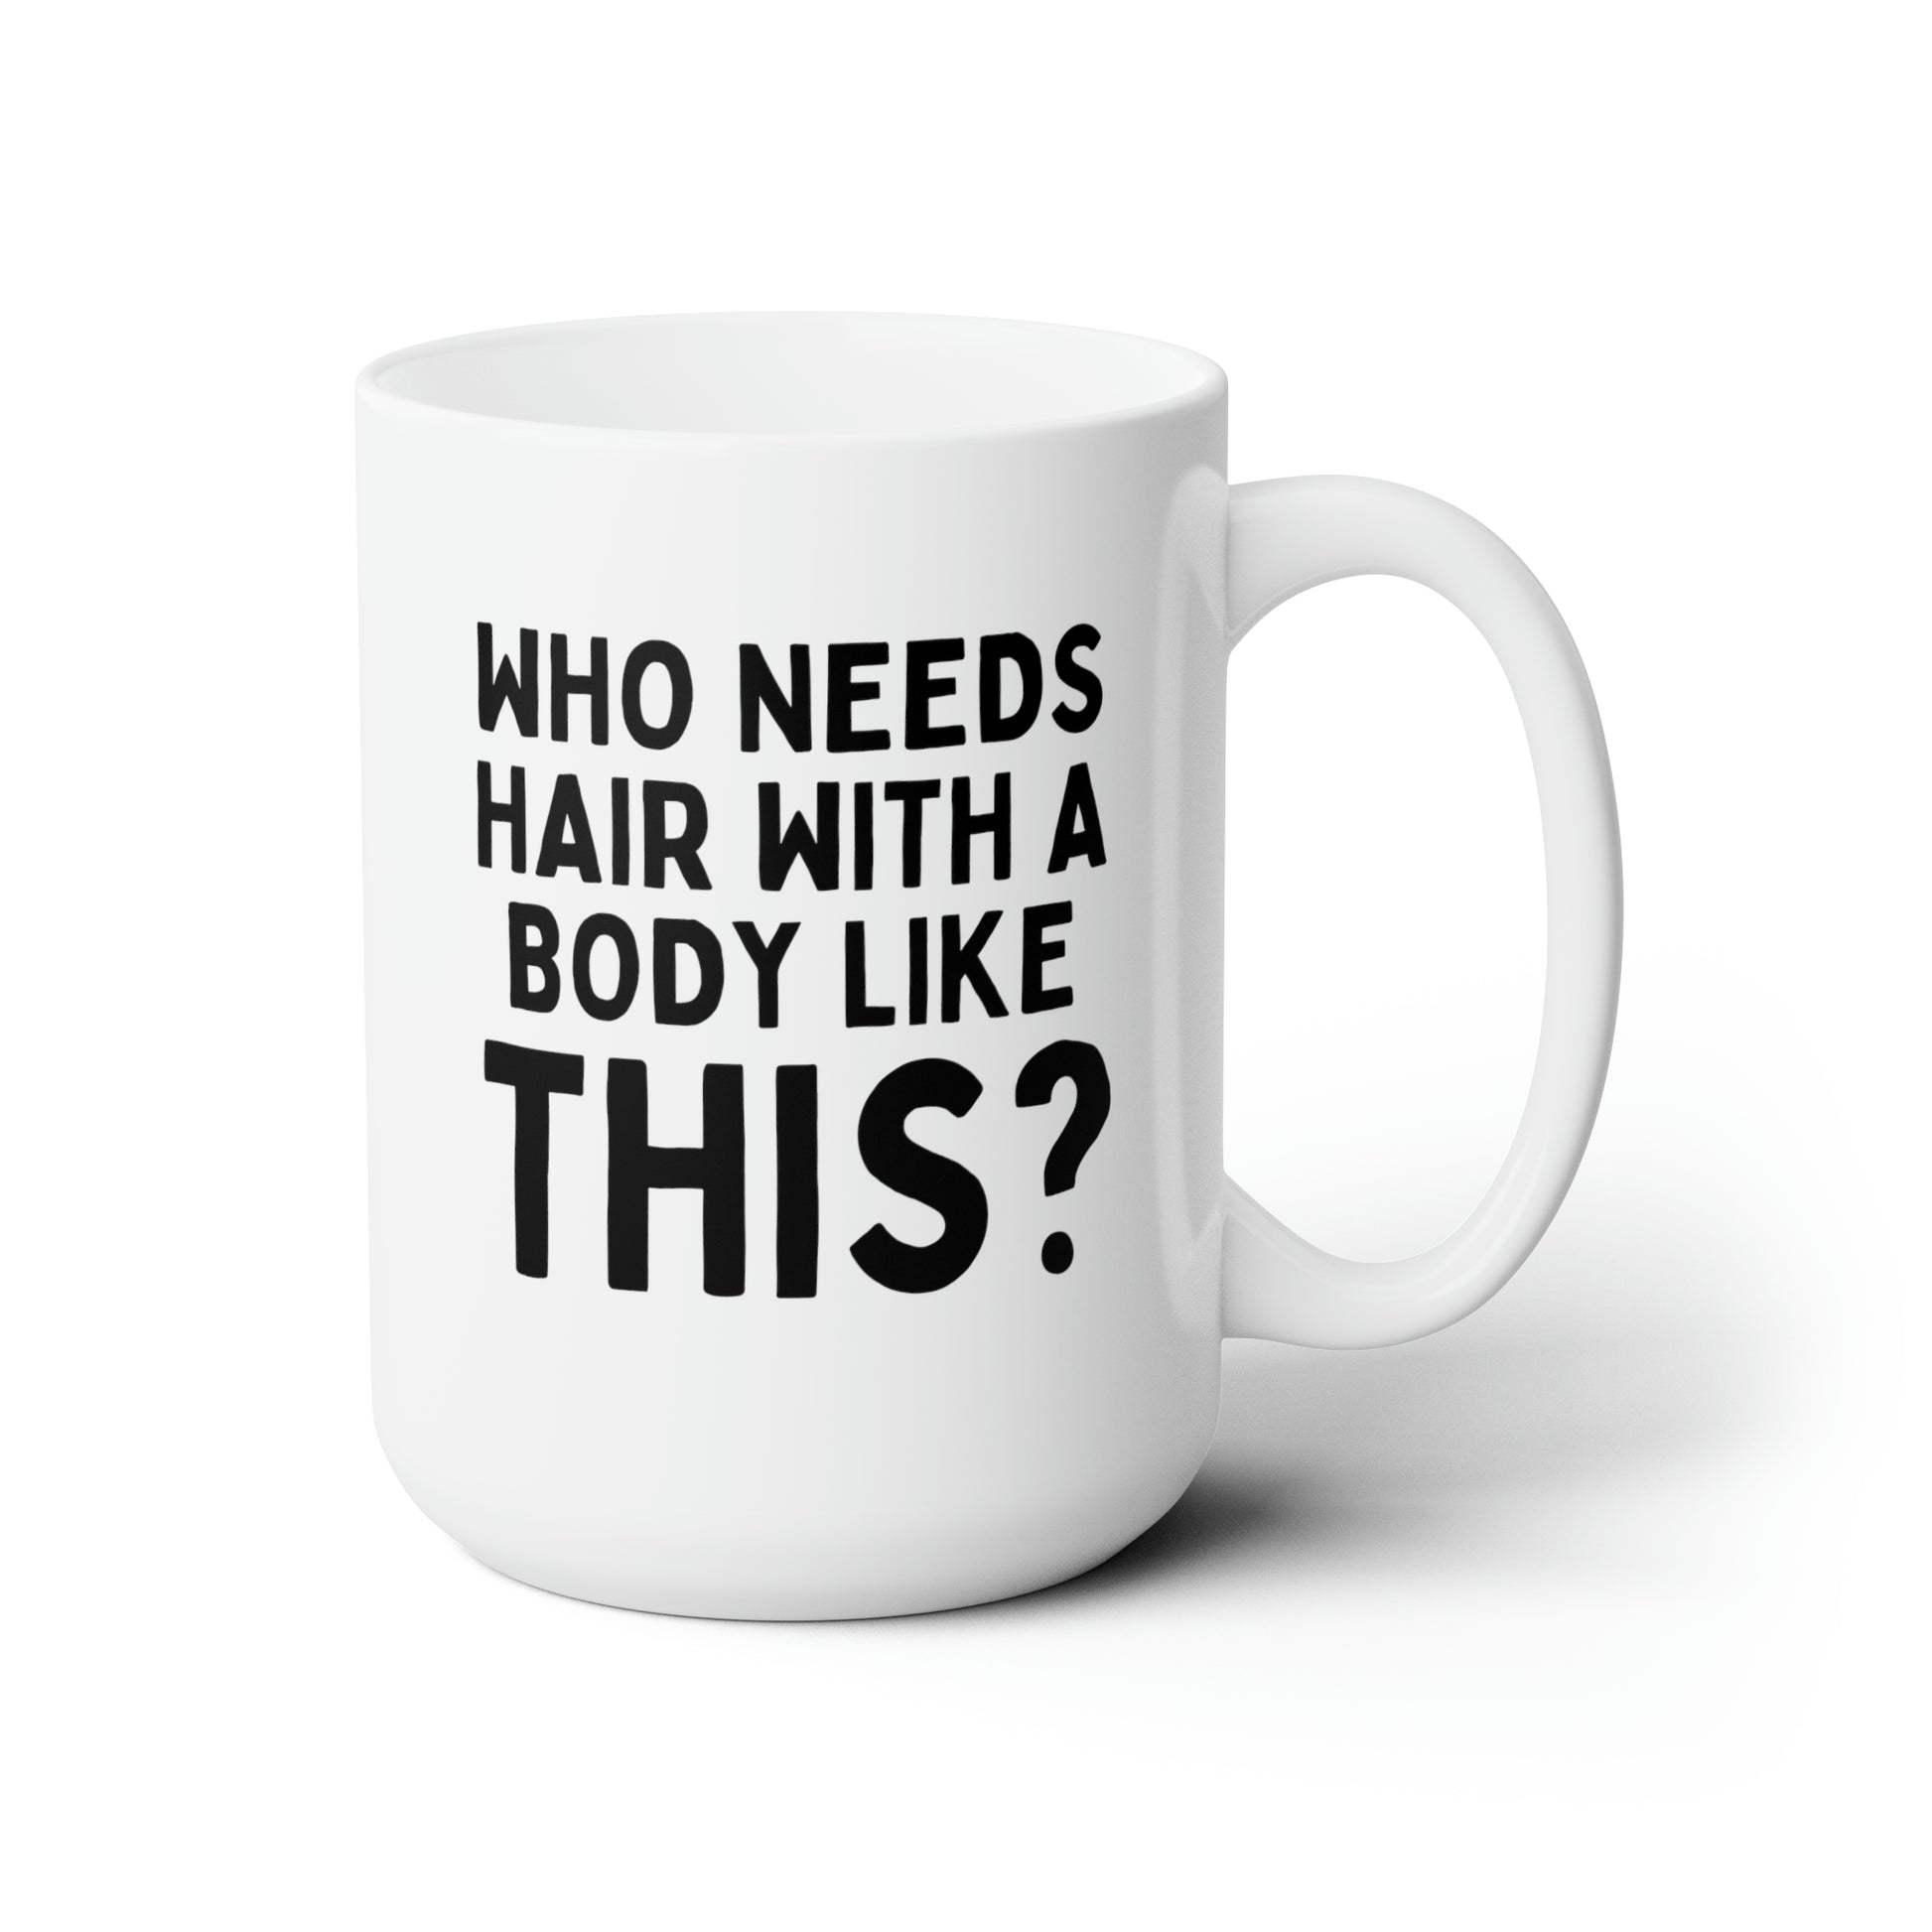 Who Needs Hair With a Body Like This 15oz white funny large coffee mug gift for bald men fathers day husband humor dad tea cup mens drinkware waveywares wavey wares wavywares wavy wares